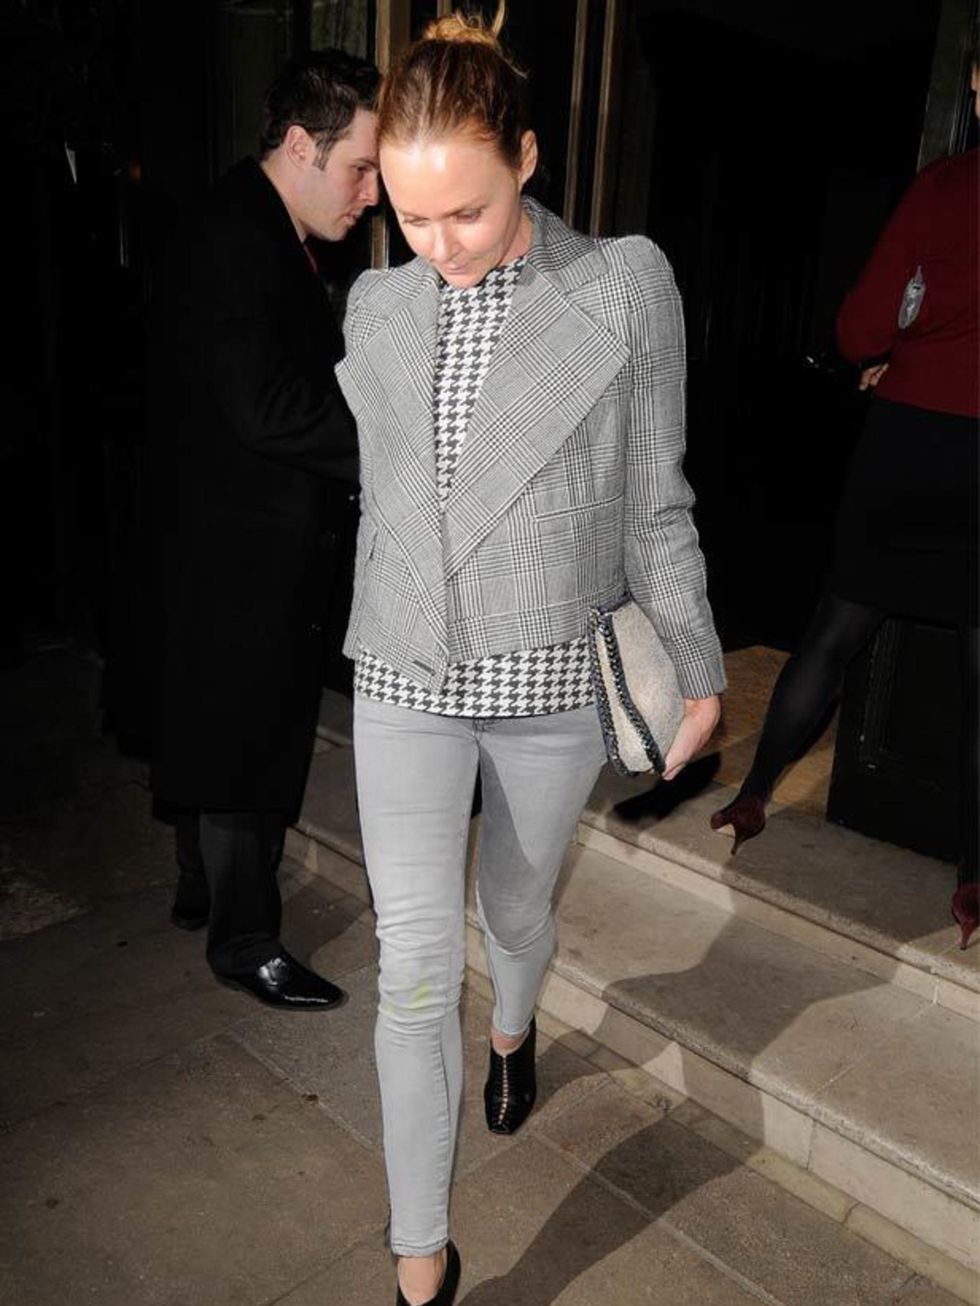 <p><a href="http://www.elleuk.com/catwalk/collections/stella-mccartney/">Stella McCartney</a> teaming her Falabella clutch with a Prince of Wales check jacket and jeans</p>